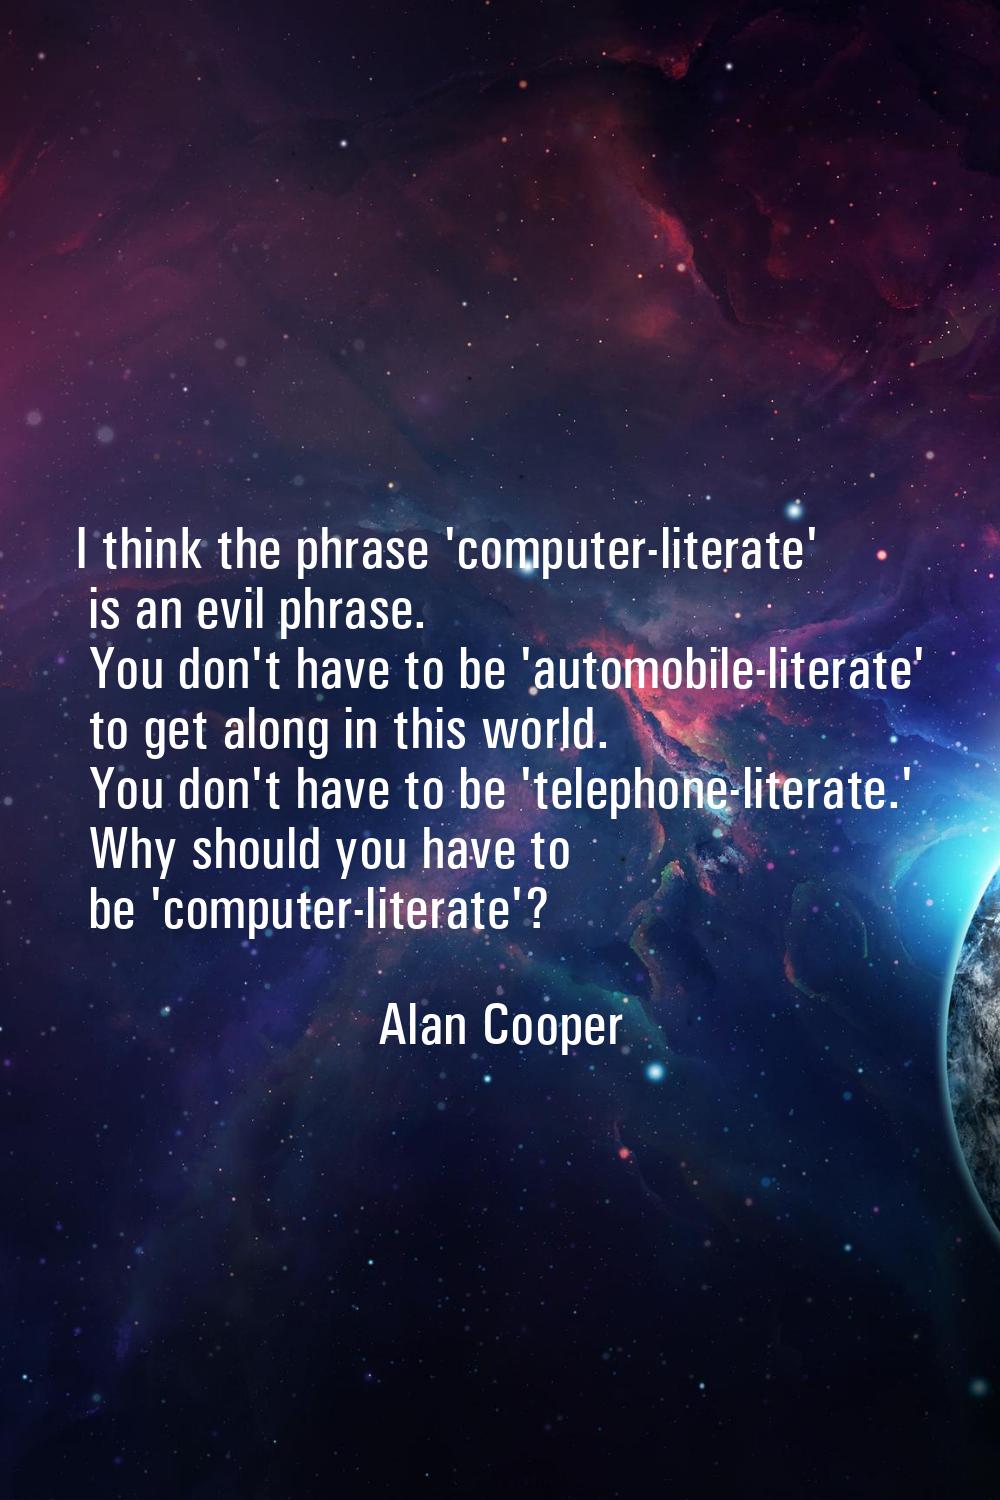 I think the phrase 'computer-literate' is an evil phrase. You don't have to be 'automobile-literate